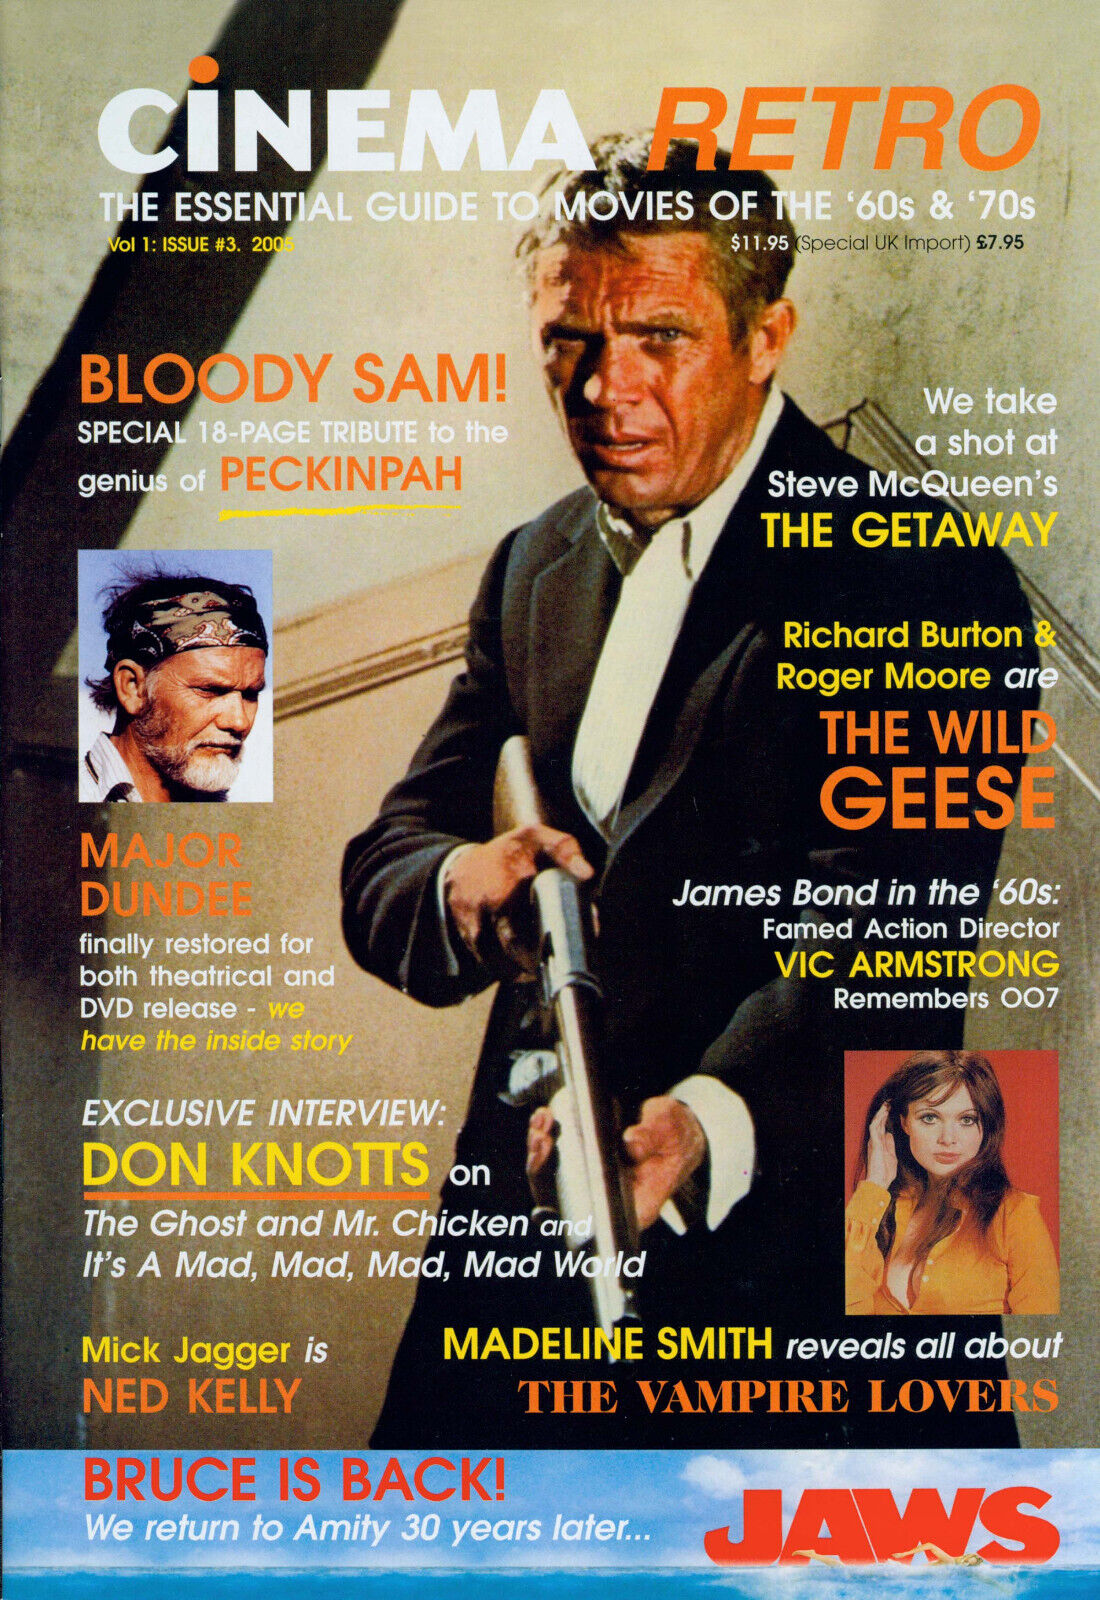 CINEMA RETRO #5 SAM PECKINPAH TRIBUTE ISSUE JAWSFEST THE WILD GEESE DON KNOTTS